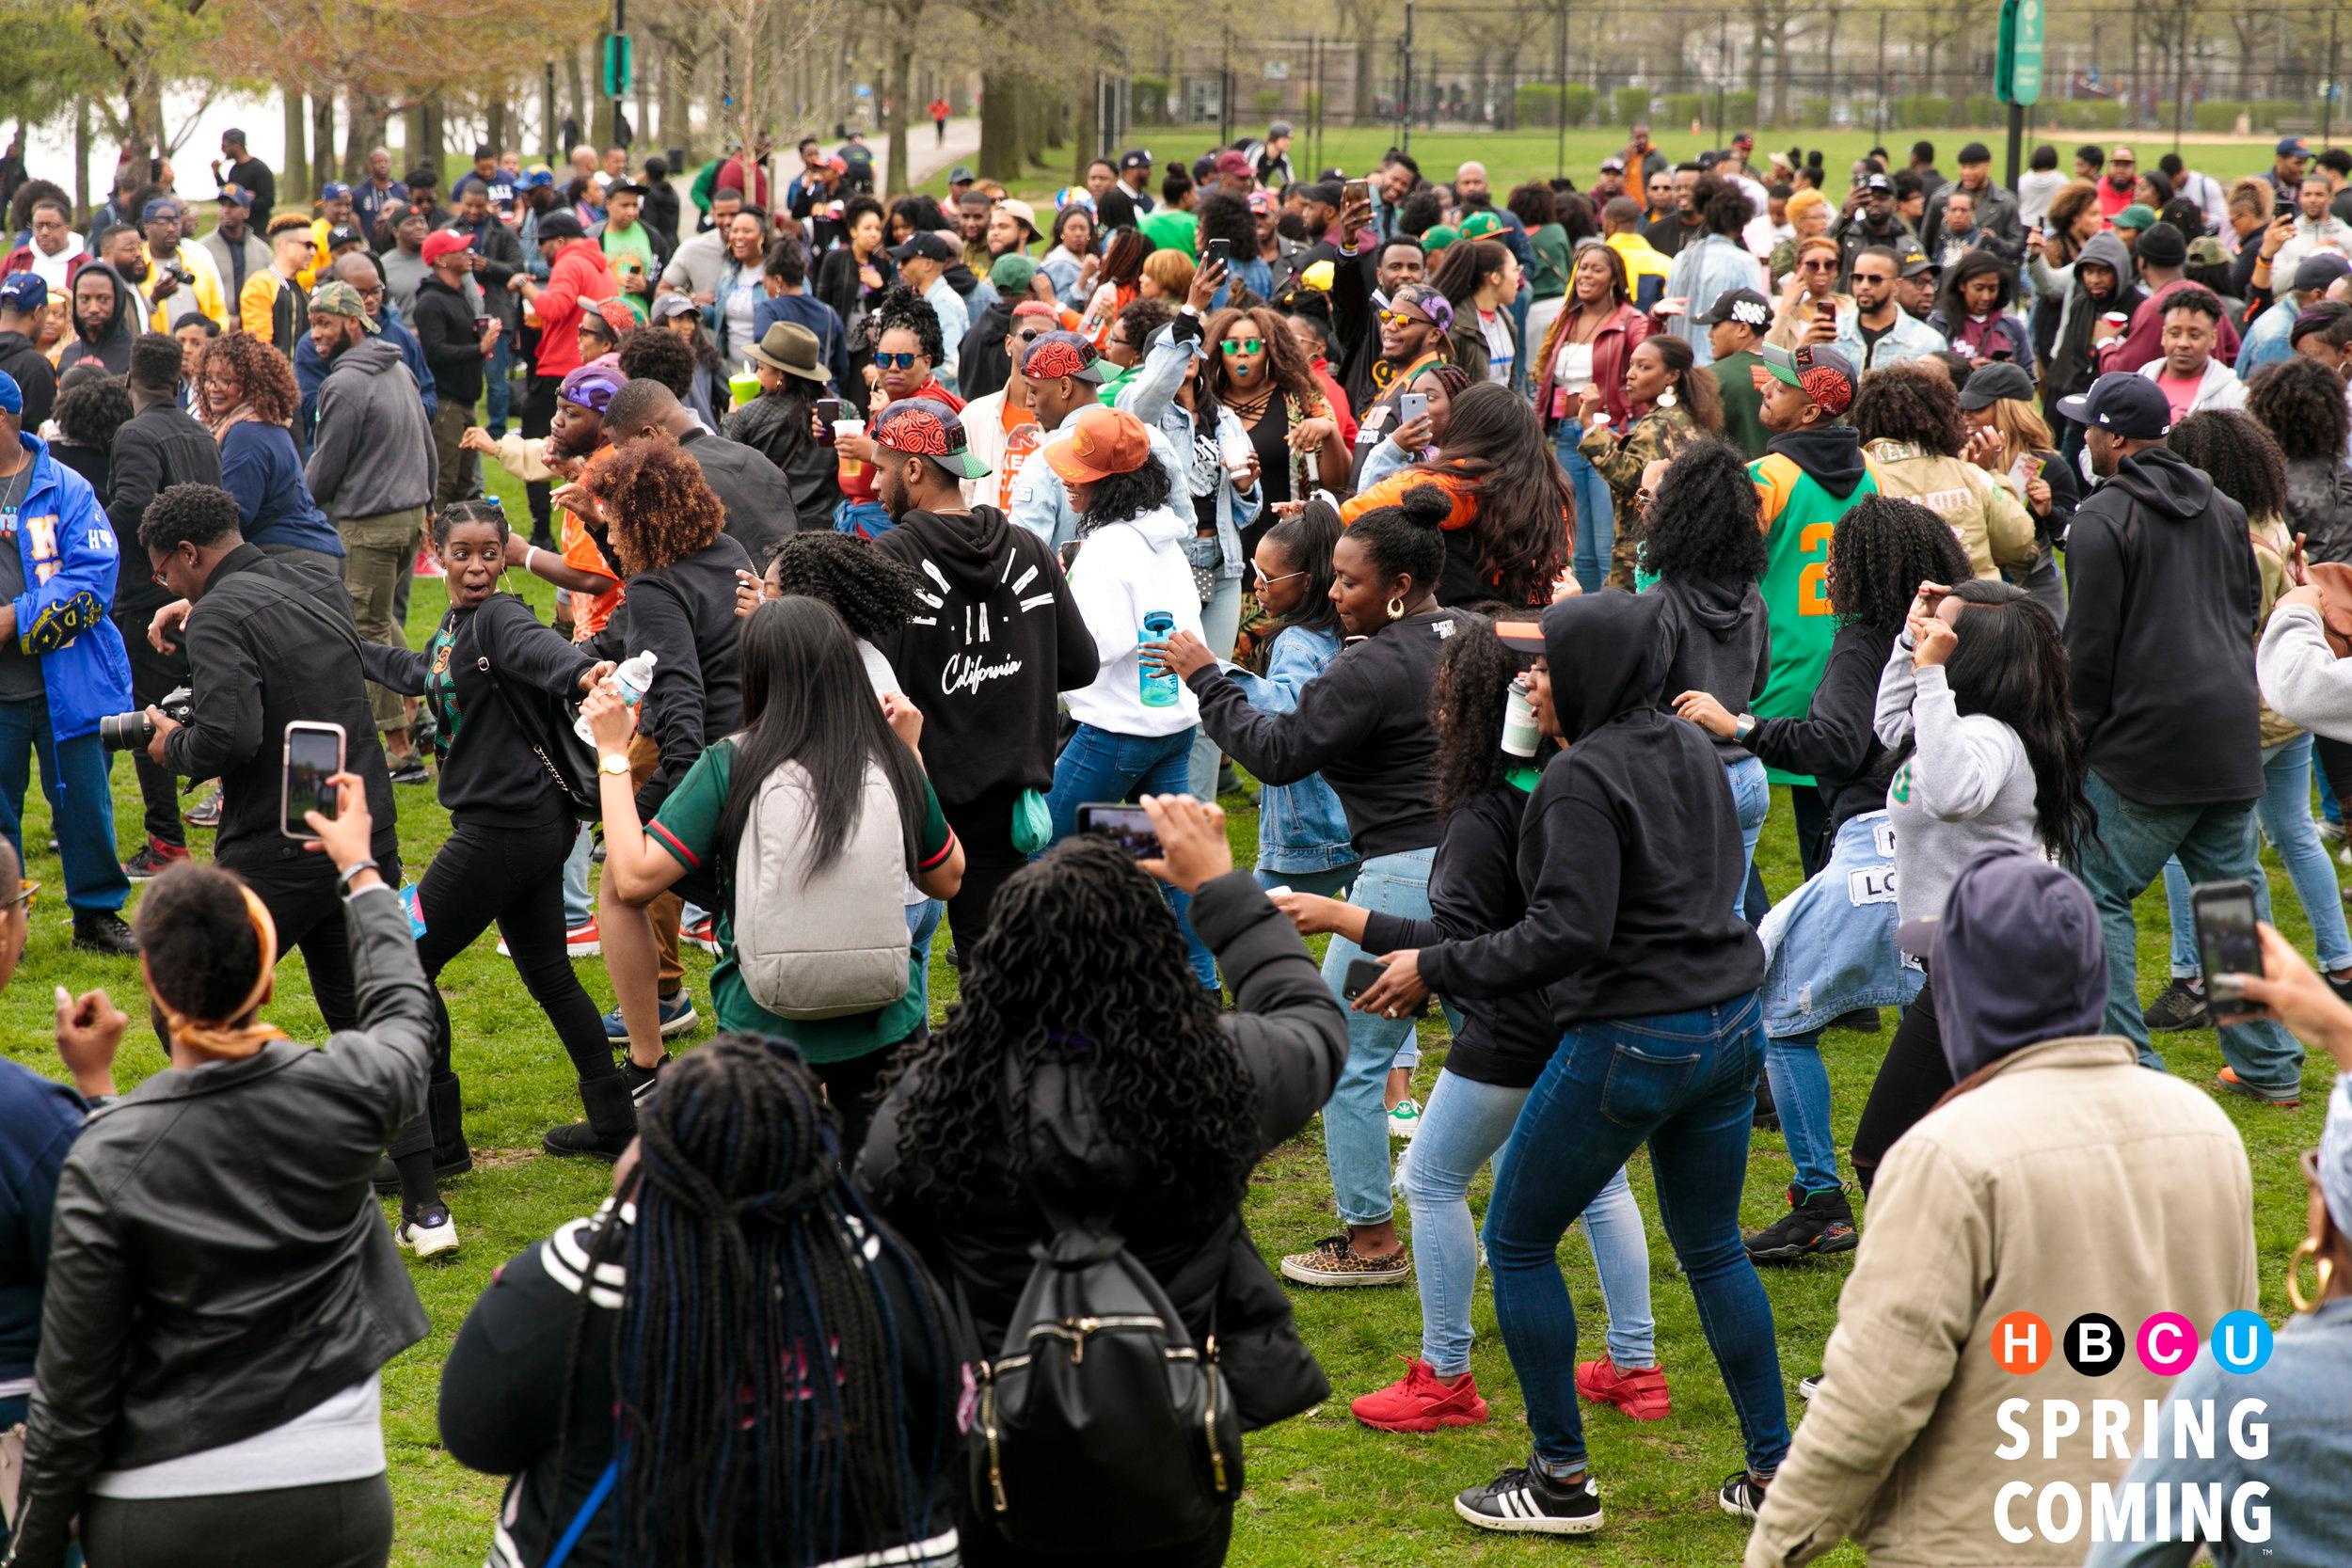 HBCU SpringComing Festival Presented By Indeed For Its In-Person Return To NYC